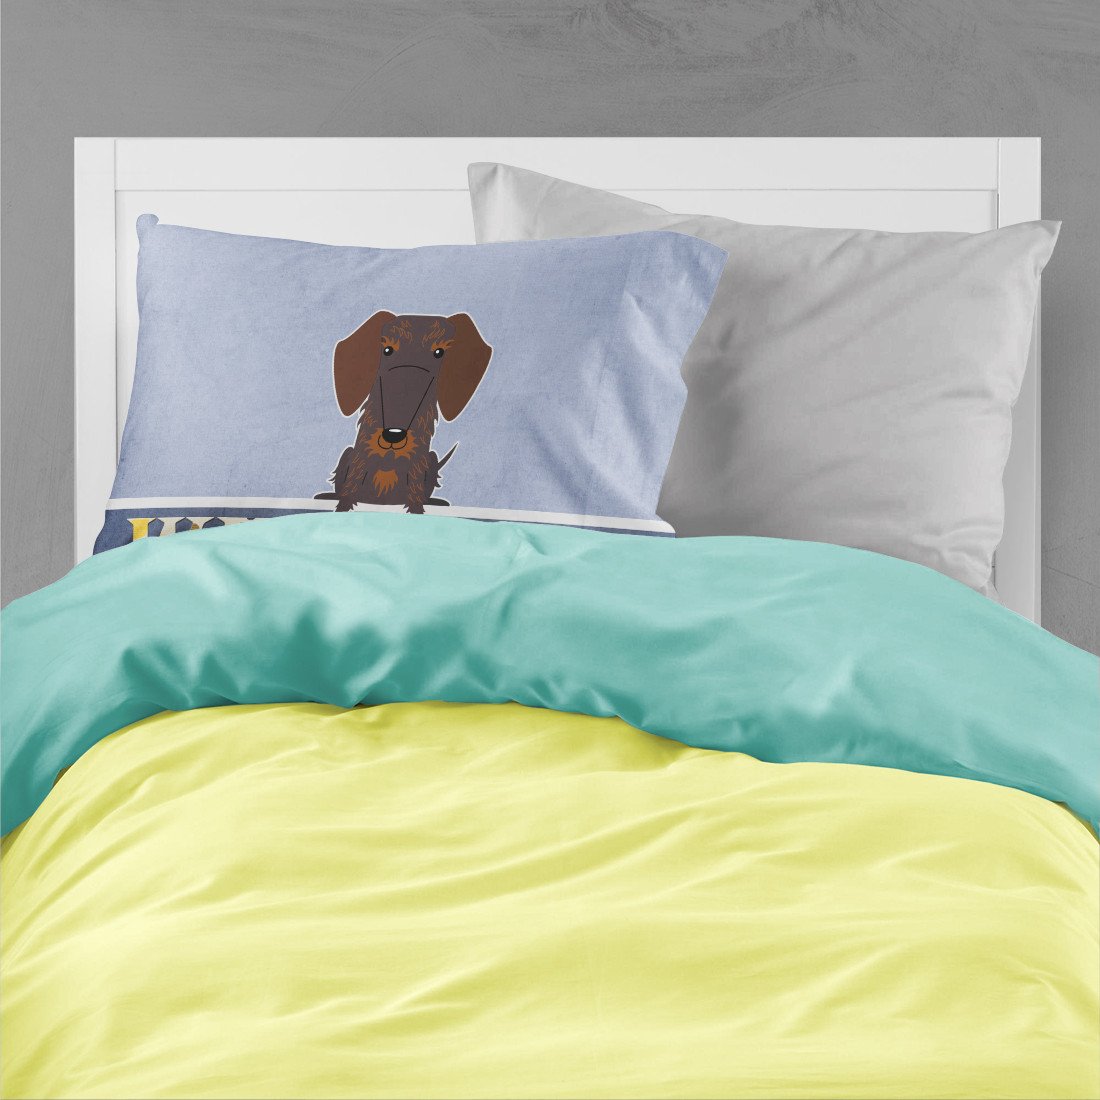 Wire Haired Dachshund Chocolate Welcome Fabric Standard Pillowcase BB5710PILLOWCASE by Caroline's Treasures